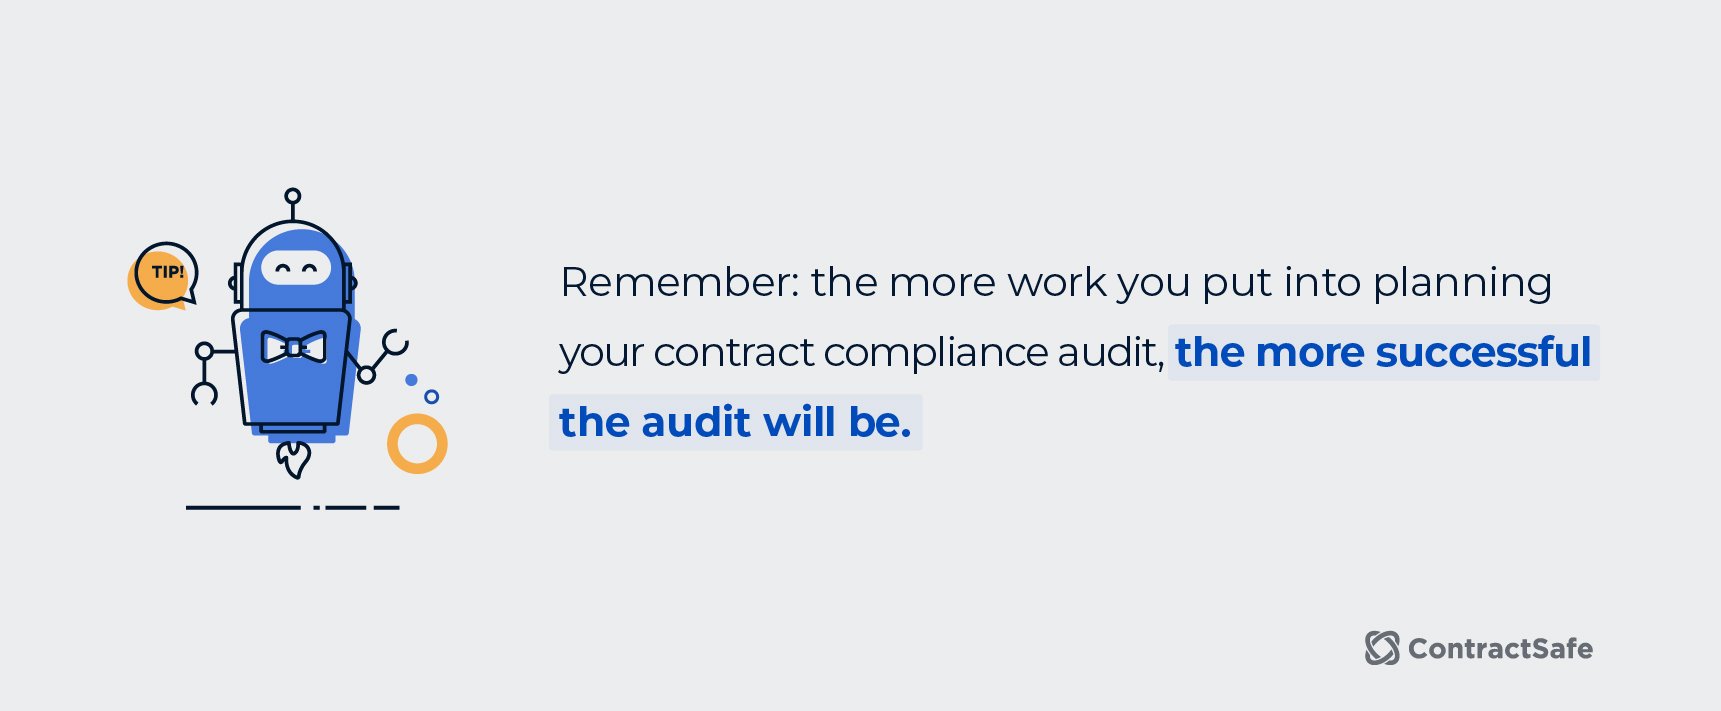 ContractSafe-Blog-Healthcare-Contract-Compliance-How-to-Perform-an-Audit-IMAGES-3